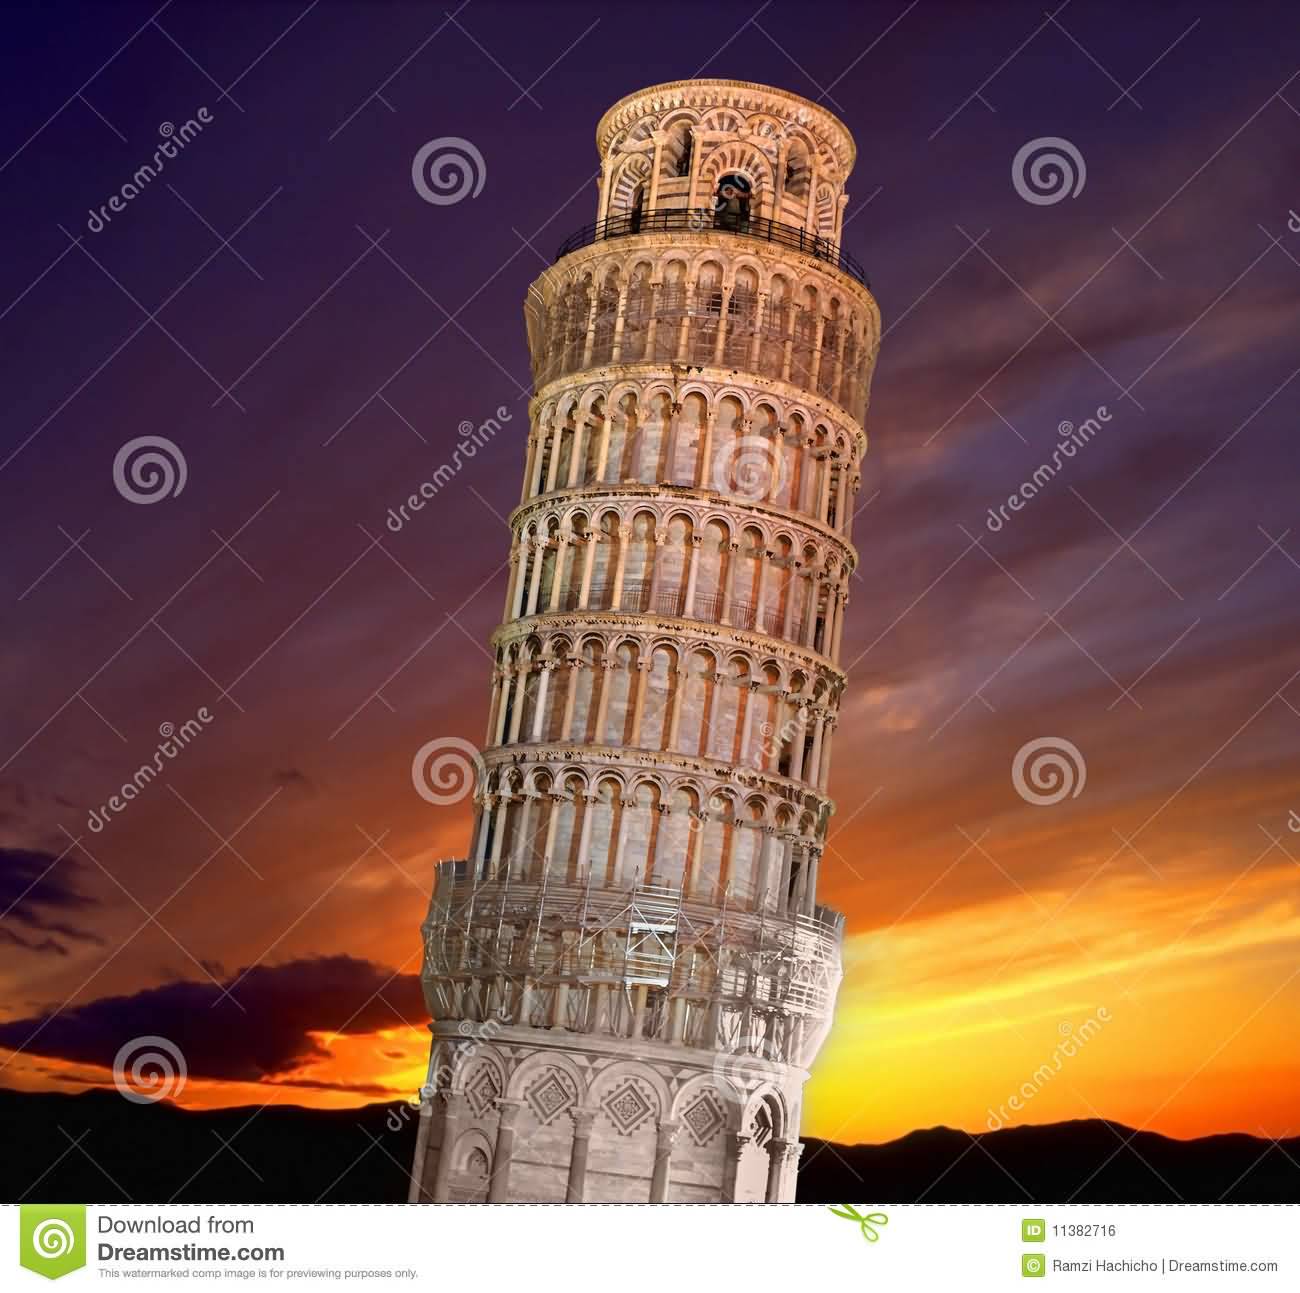 Amazing Sunset View Of The Leaning Tower Of Pisa, Italy